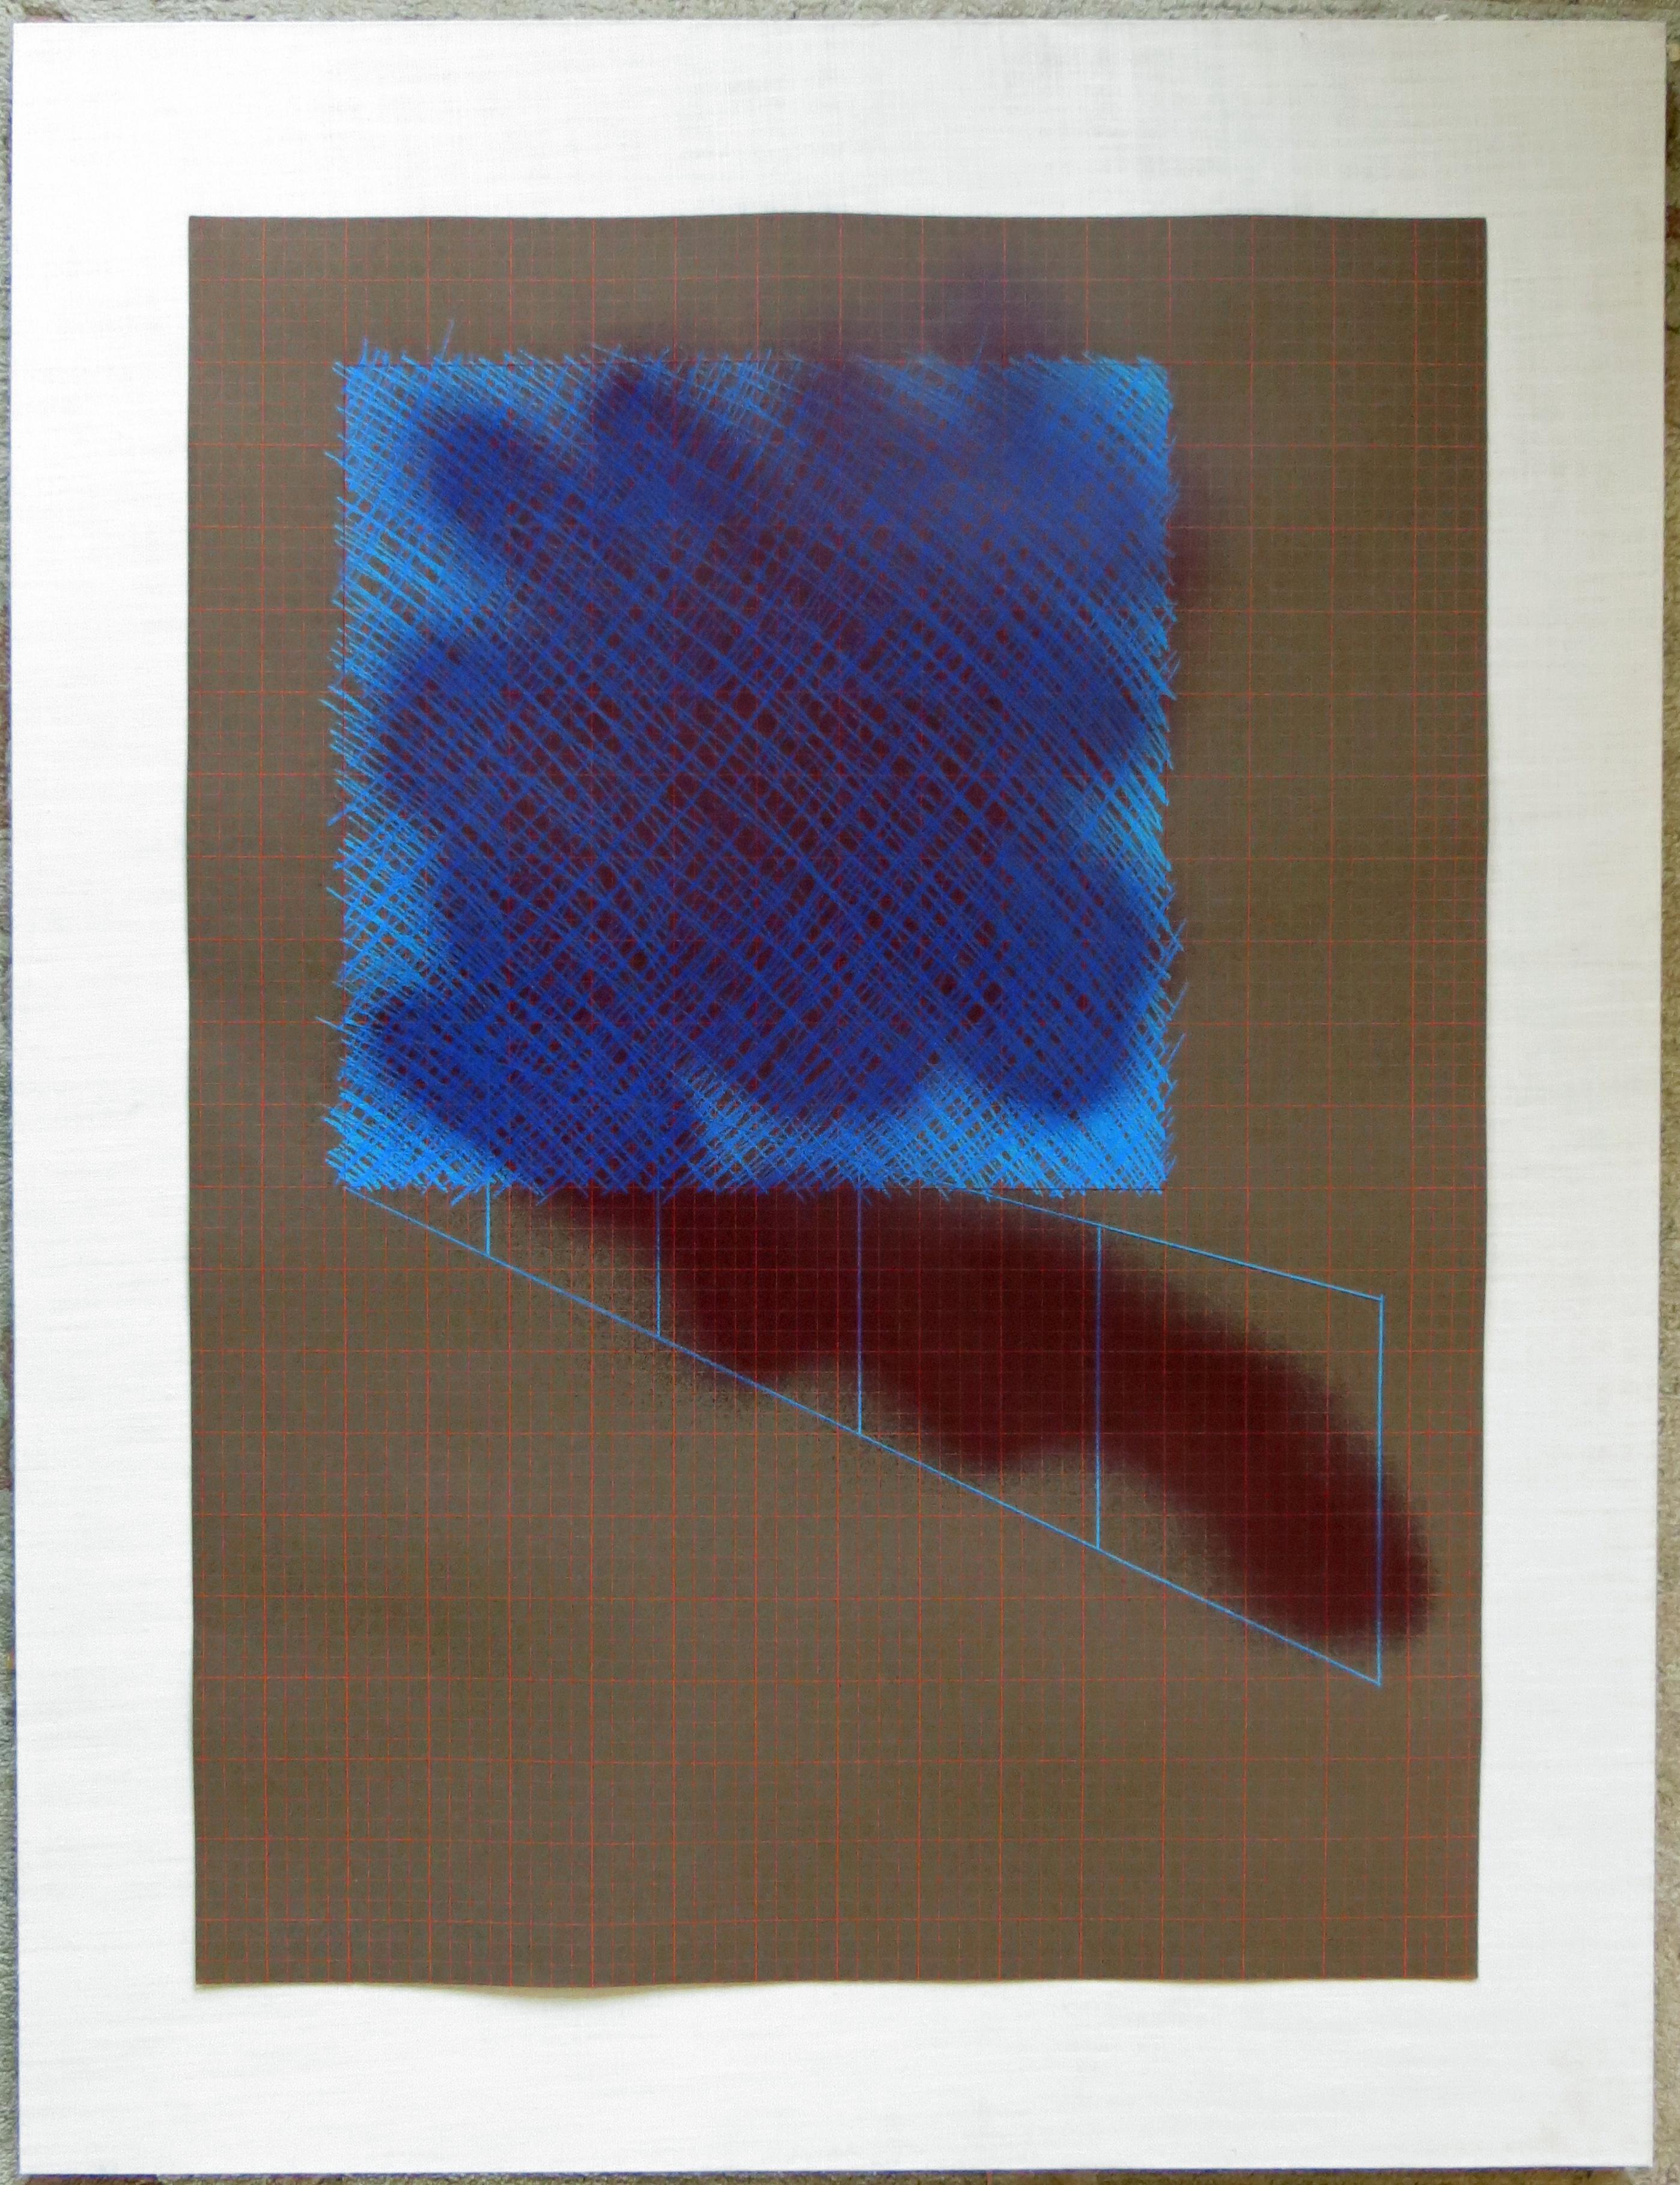 Untitled- Abstract Grid - Print by Richard Smith